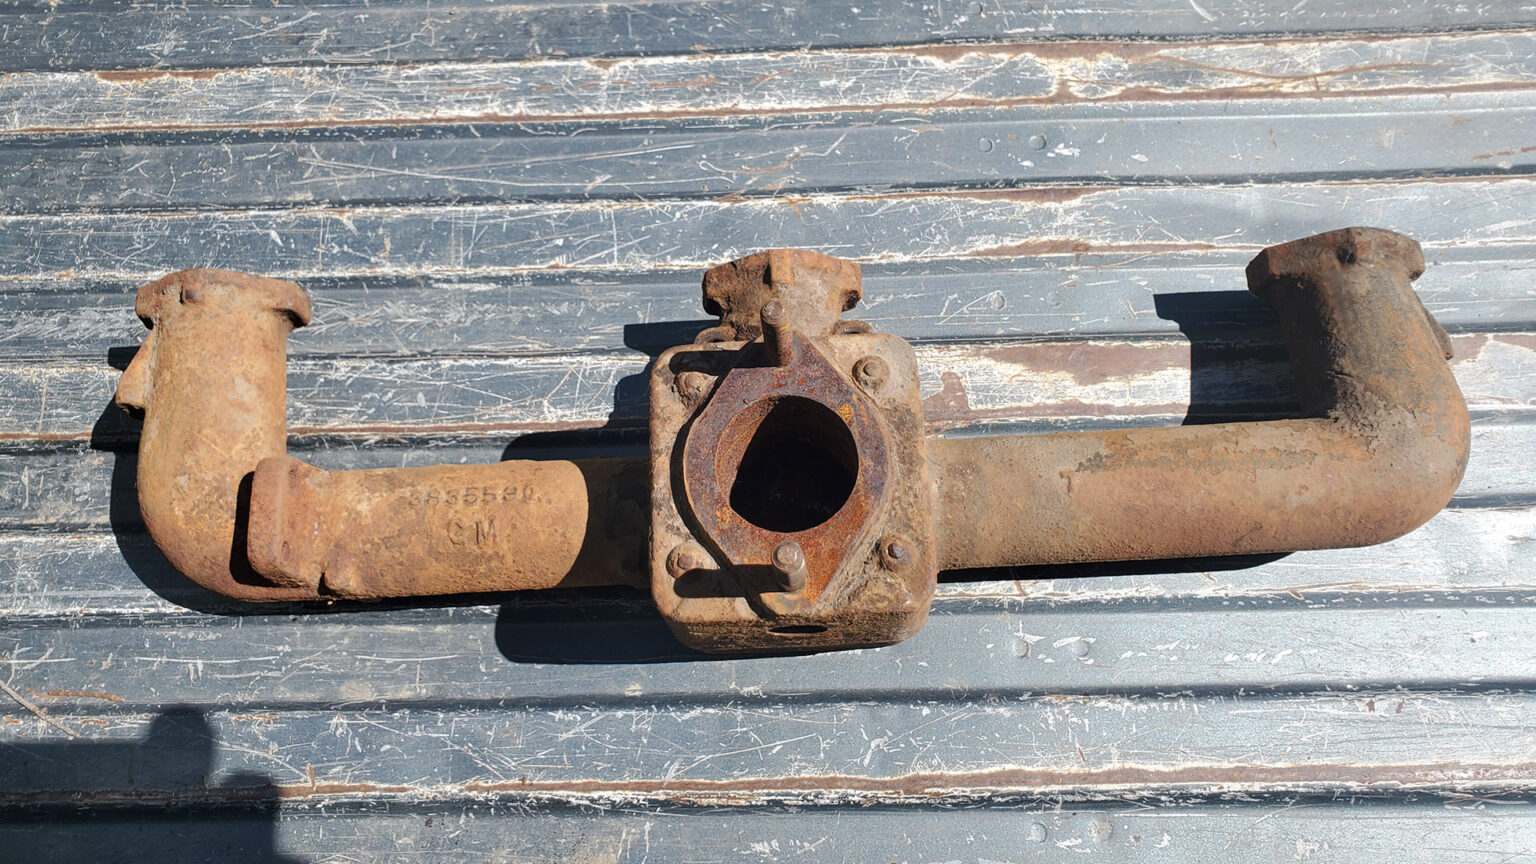 Crusty and rusty manifold before